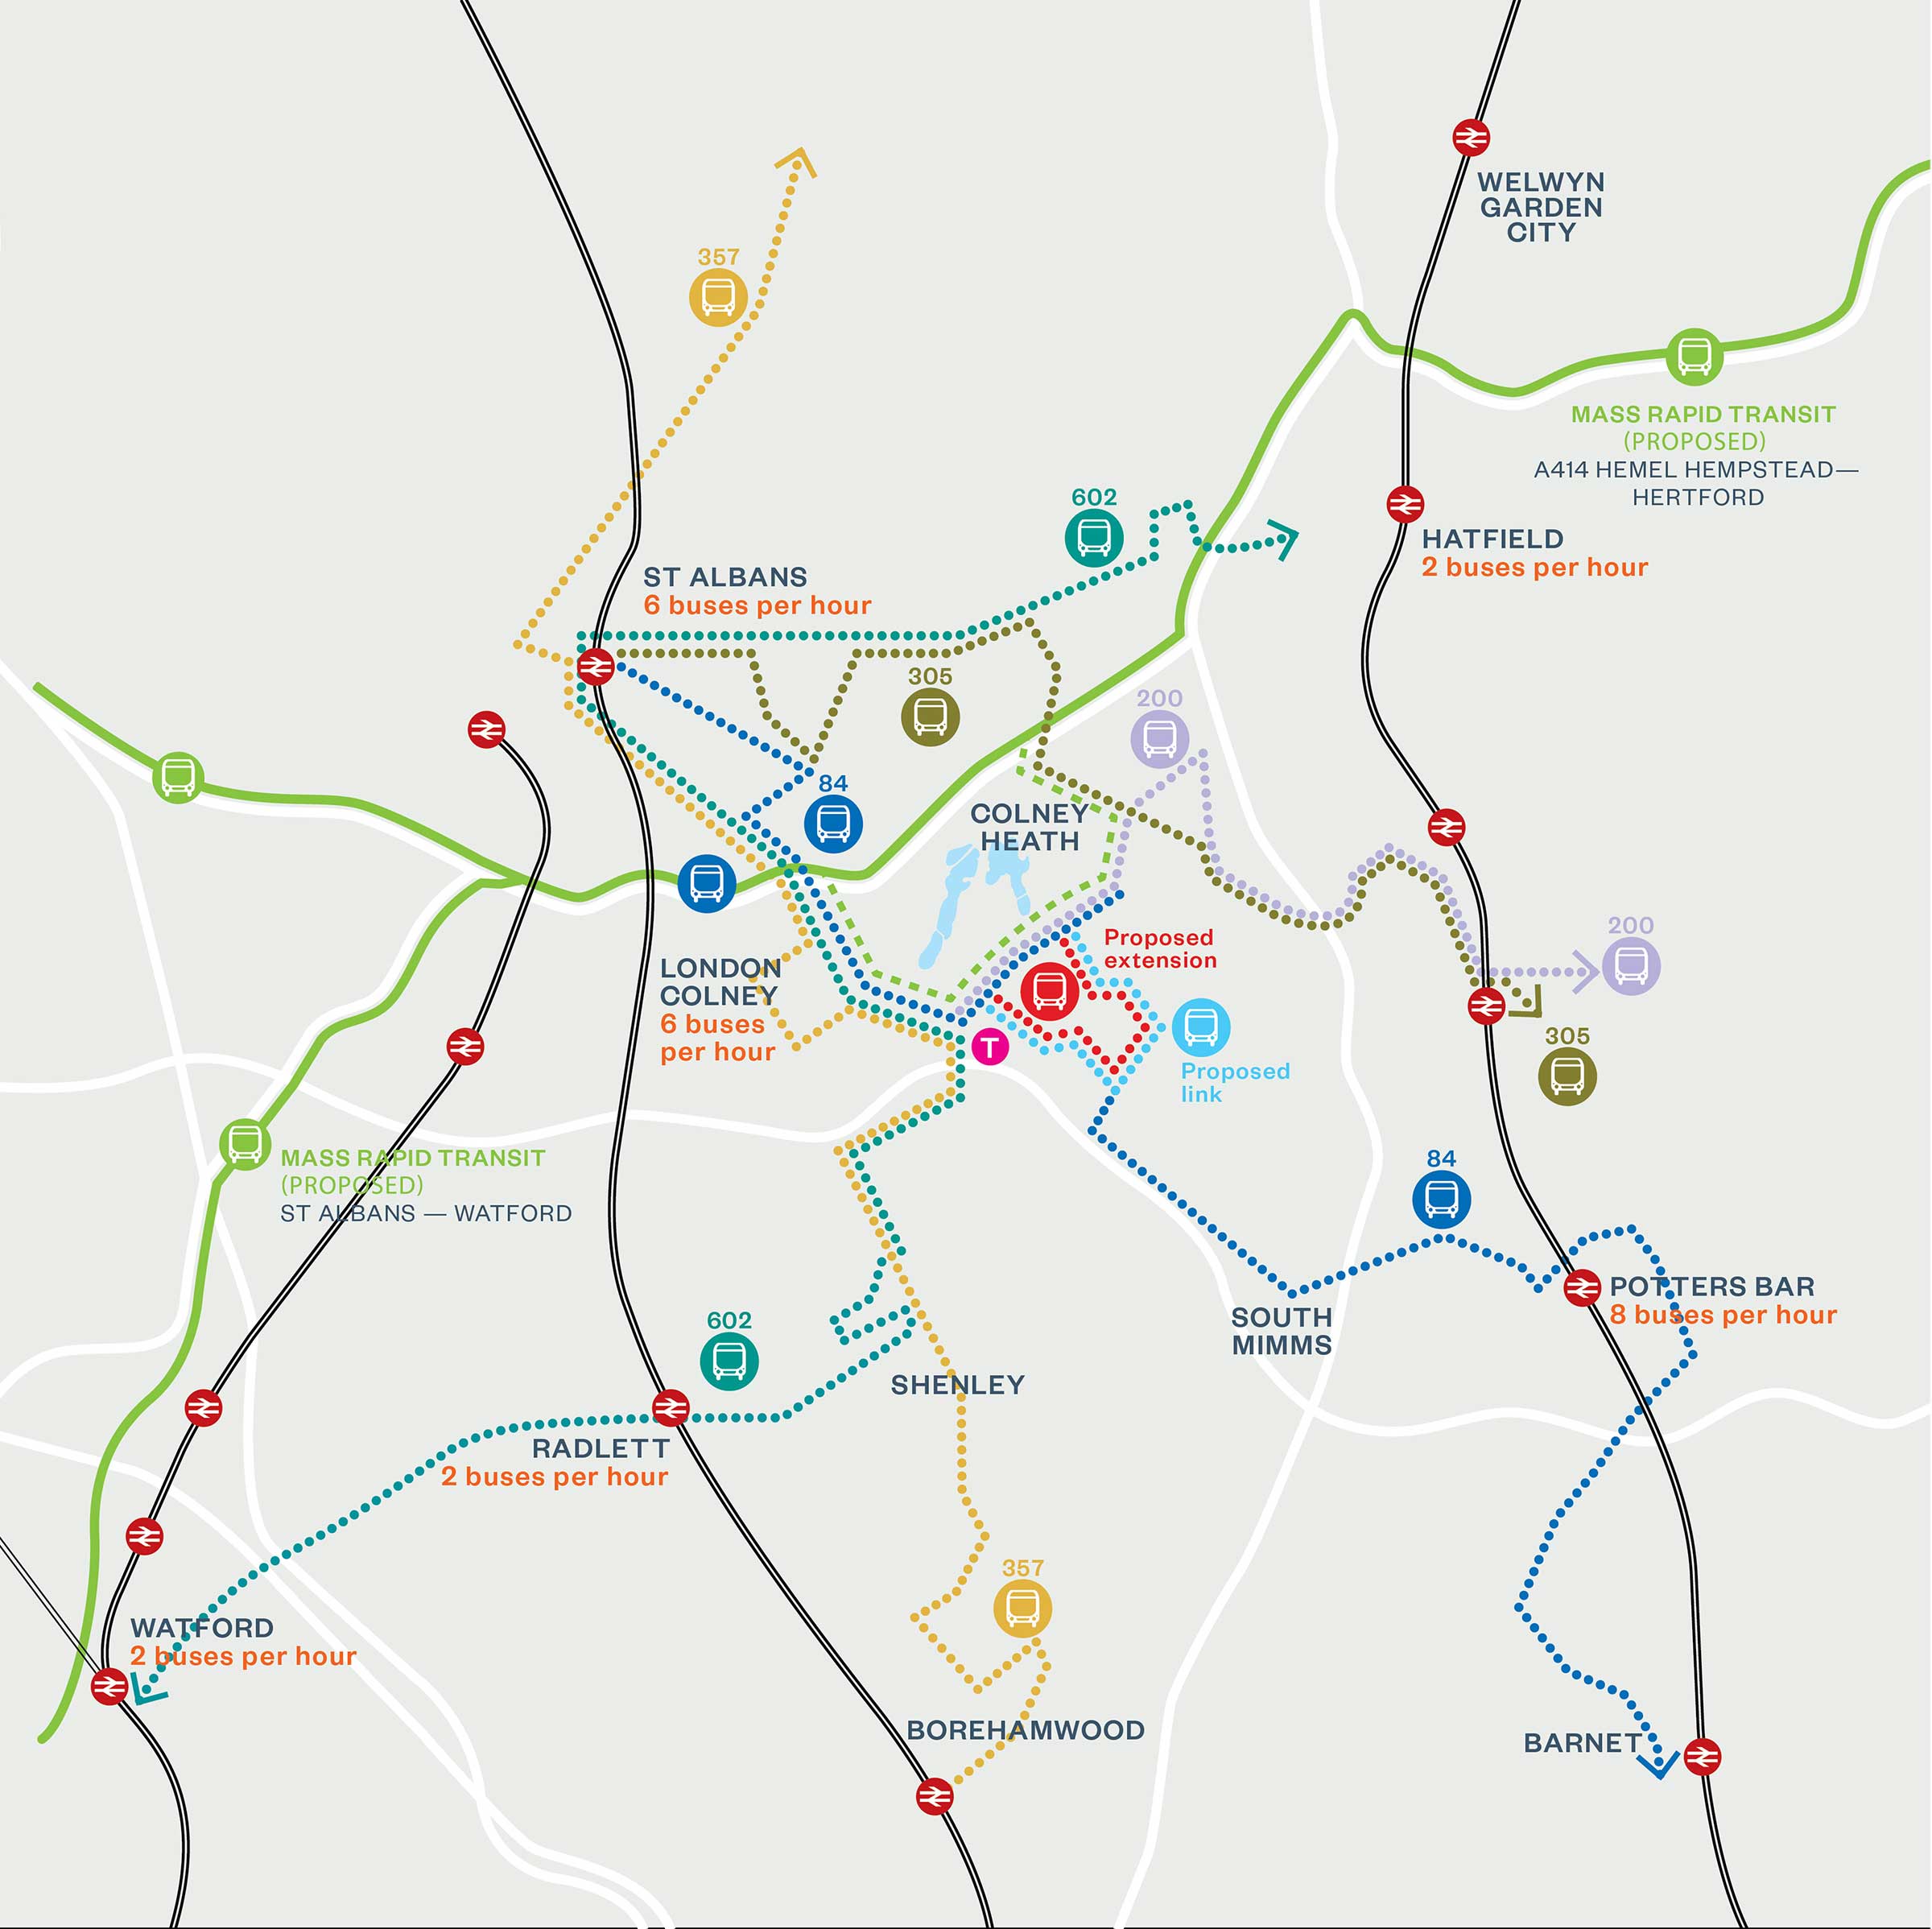 existing and proposed transport links